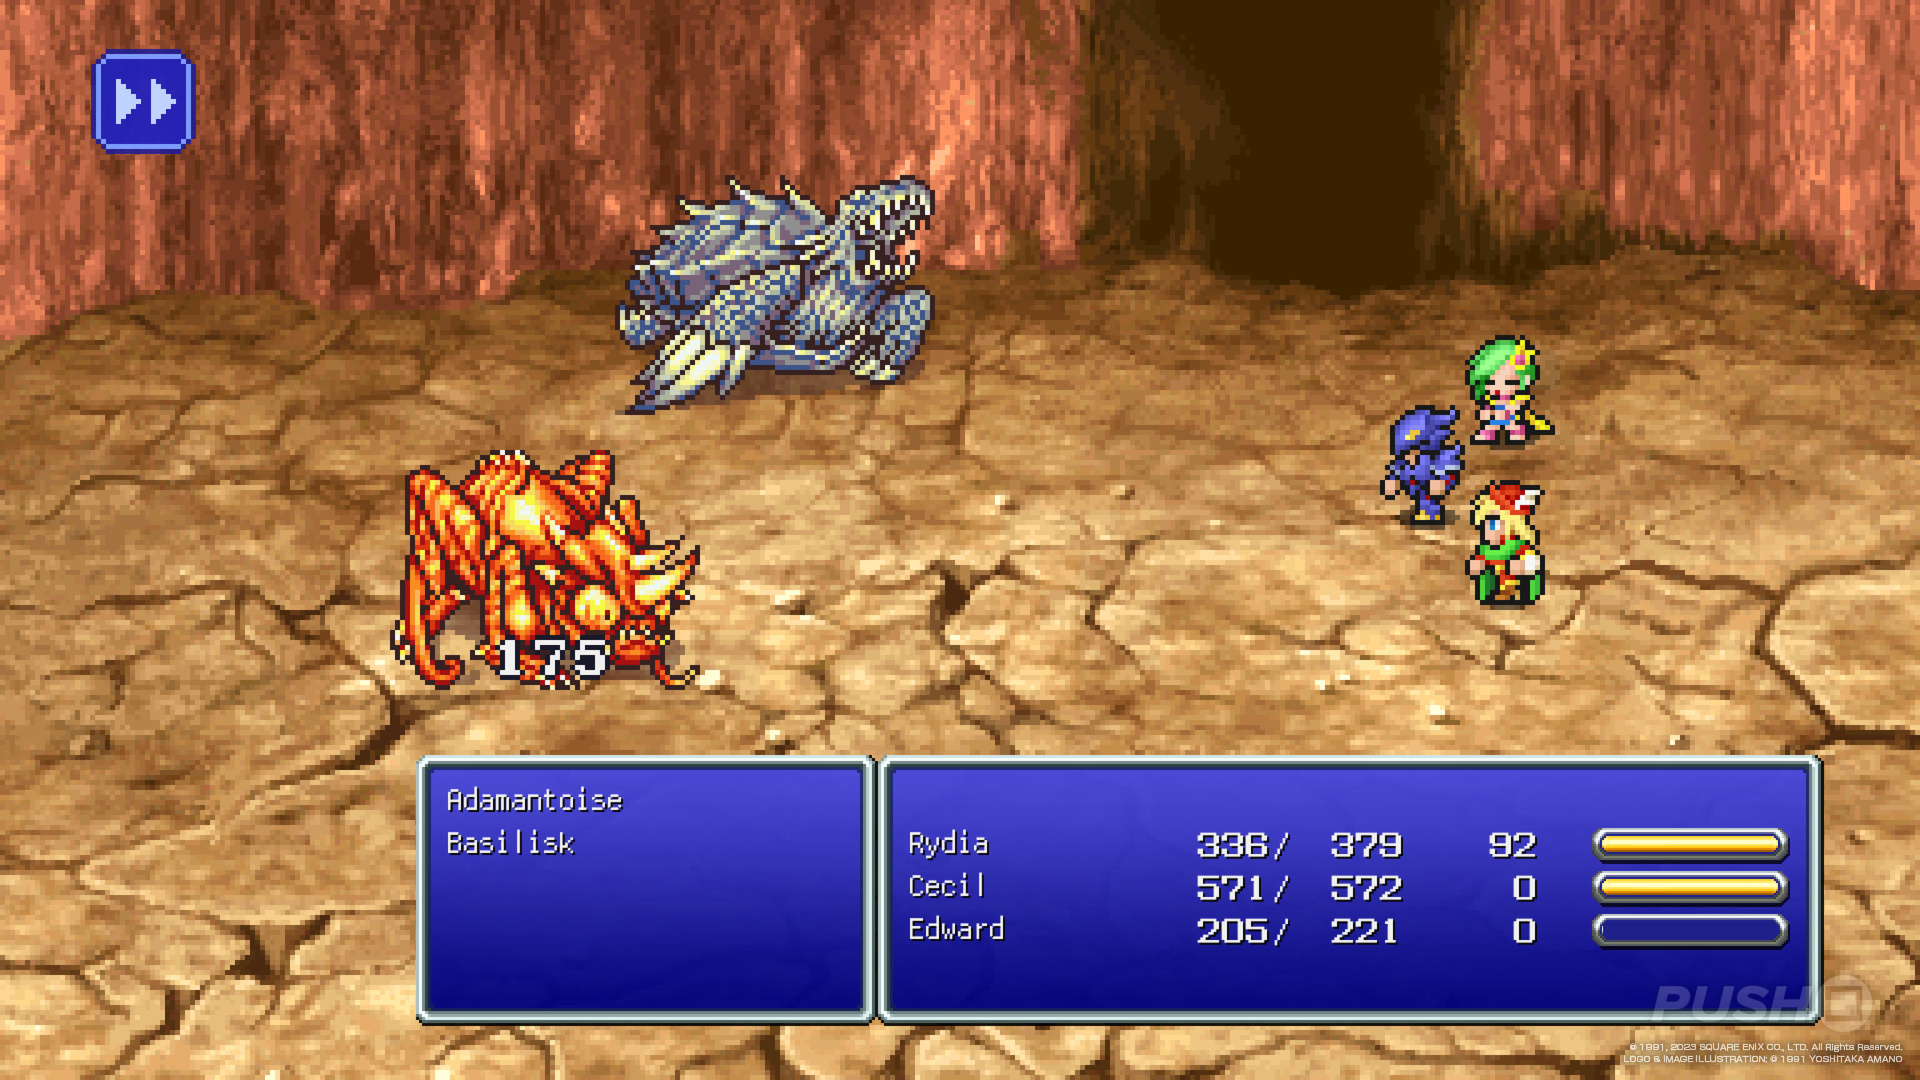 Square Enix Give Final Fantasy IV: Complete Collection The Special